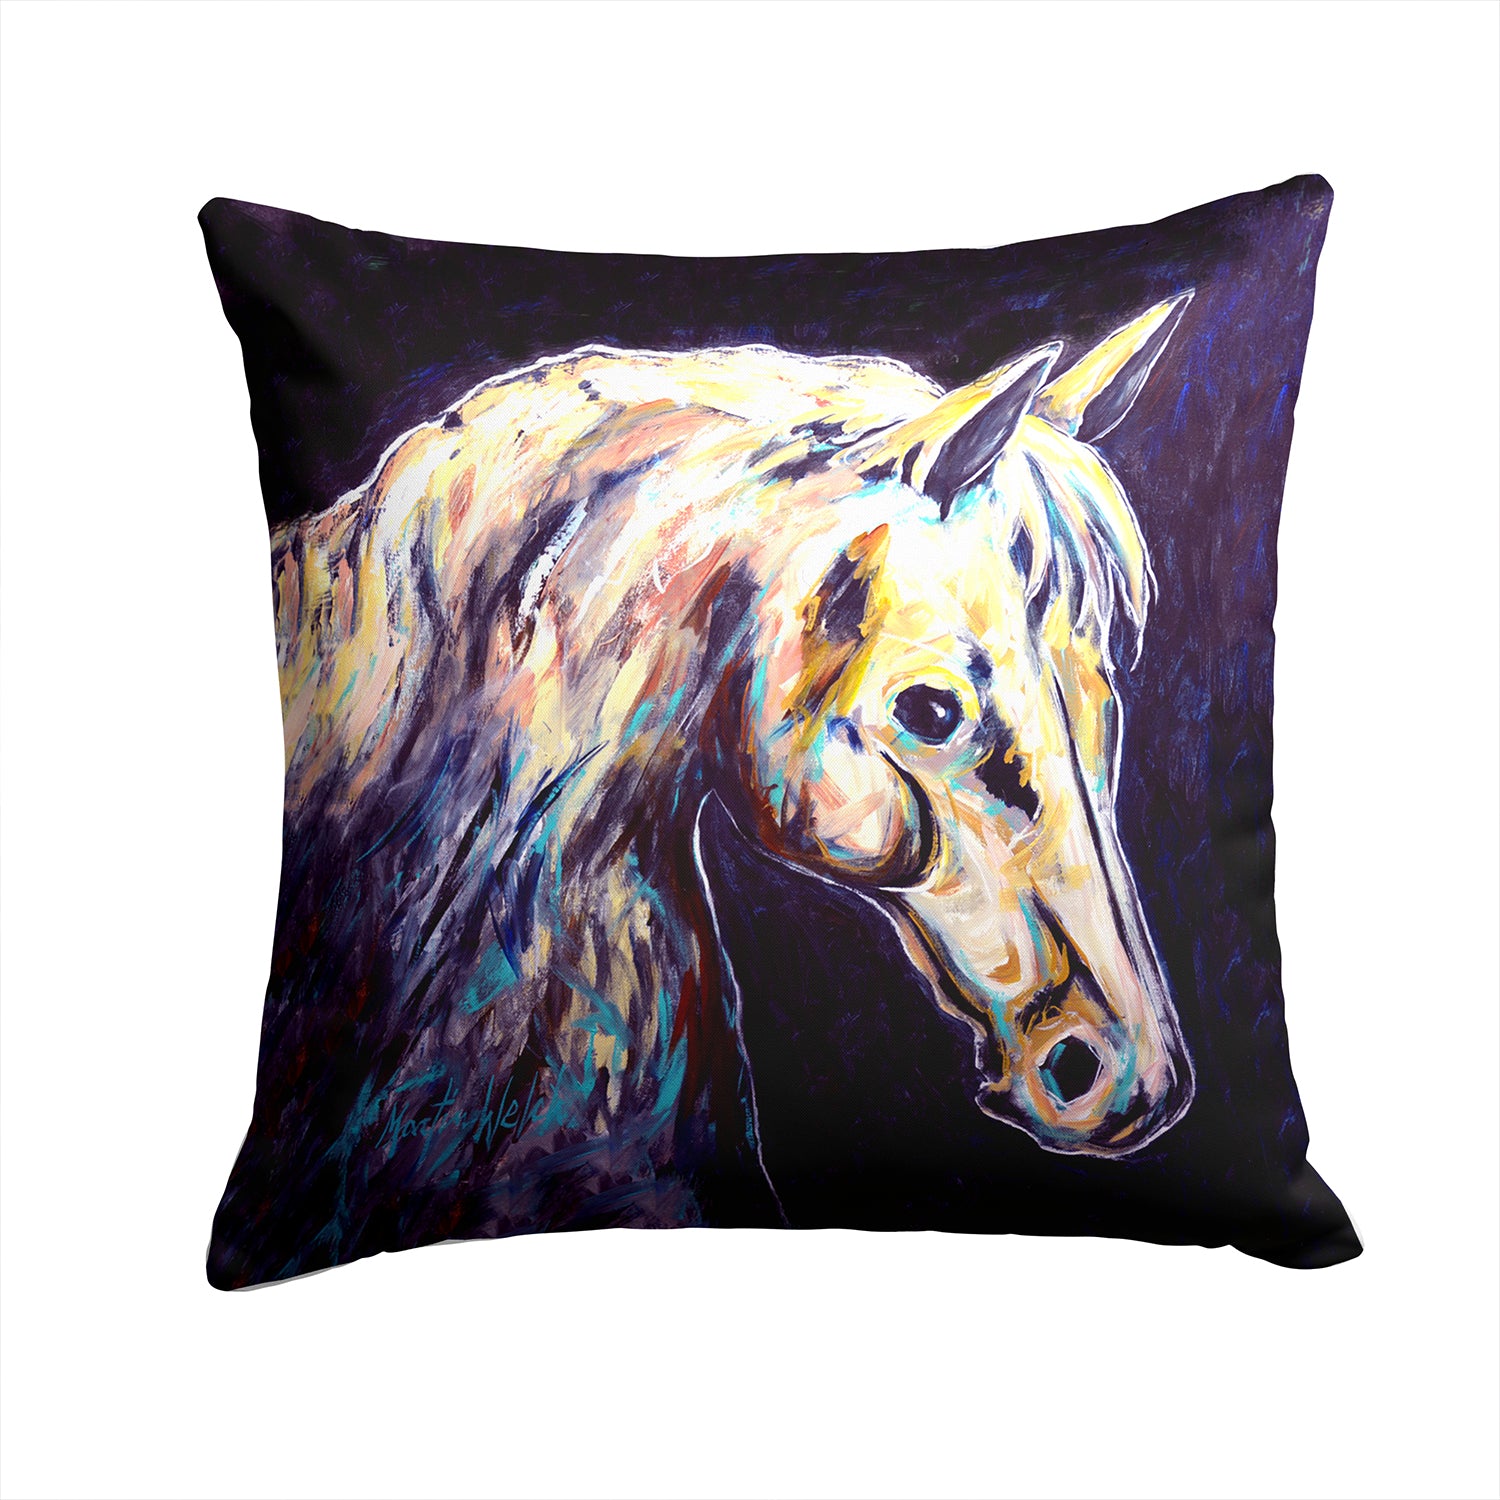 Knight Horse Fabric Decorative Pillow MW1333PW1414 - the-store.com